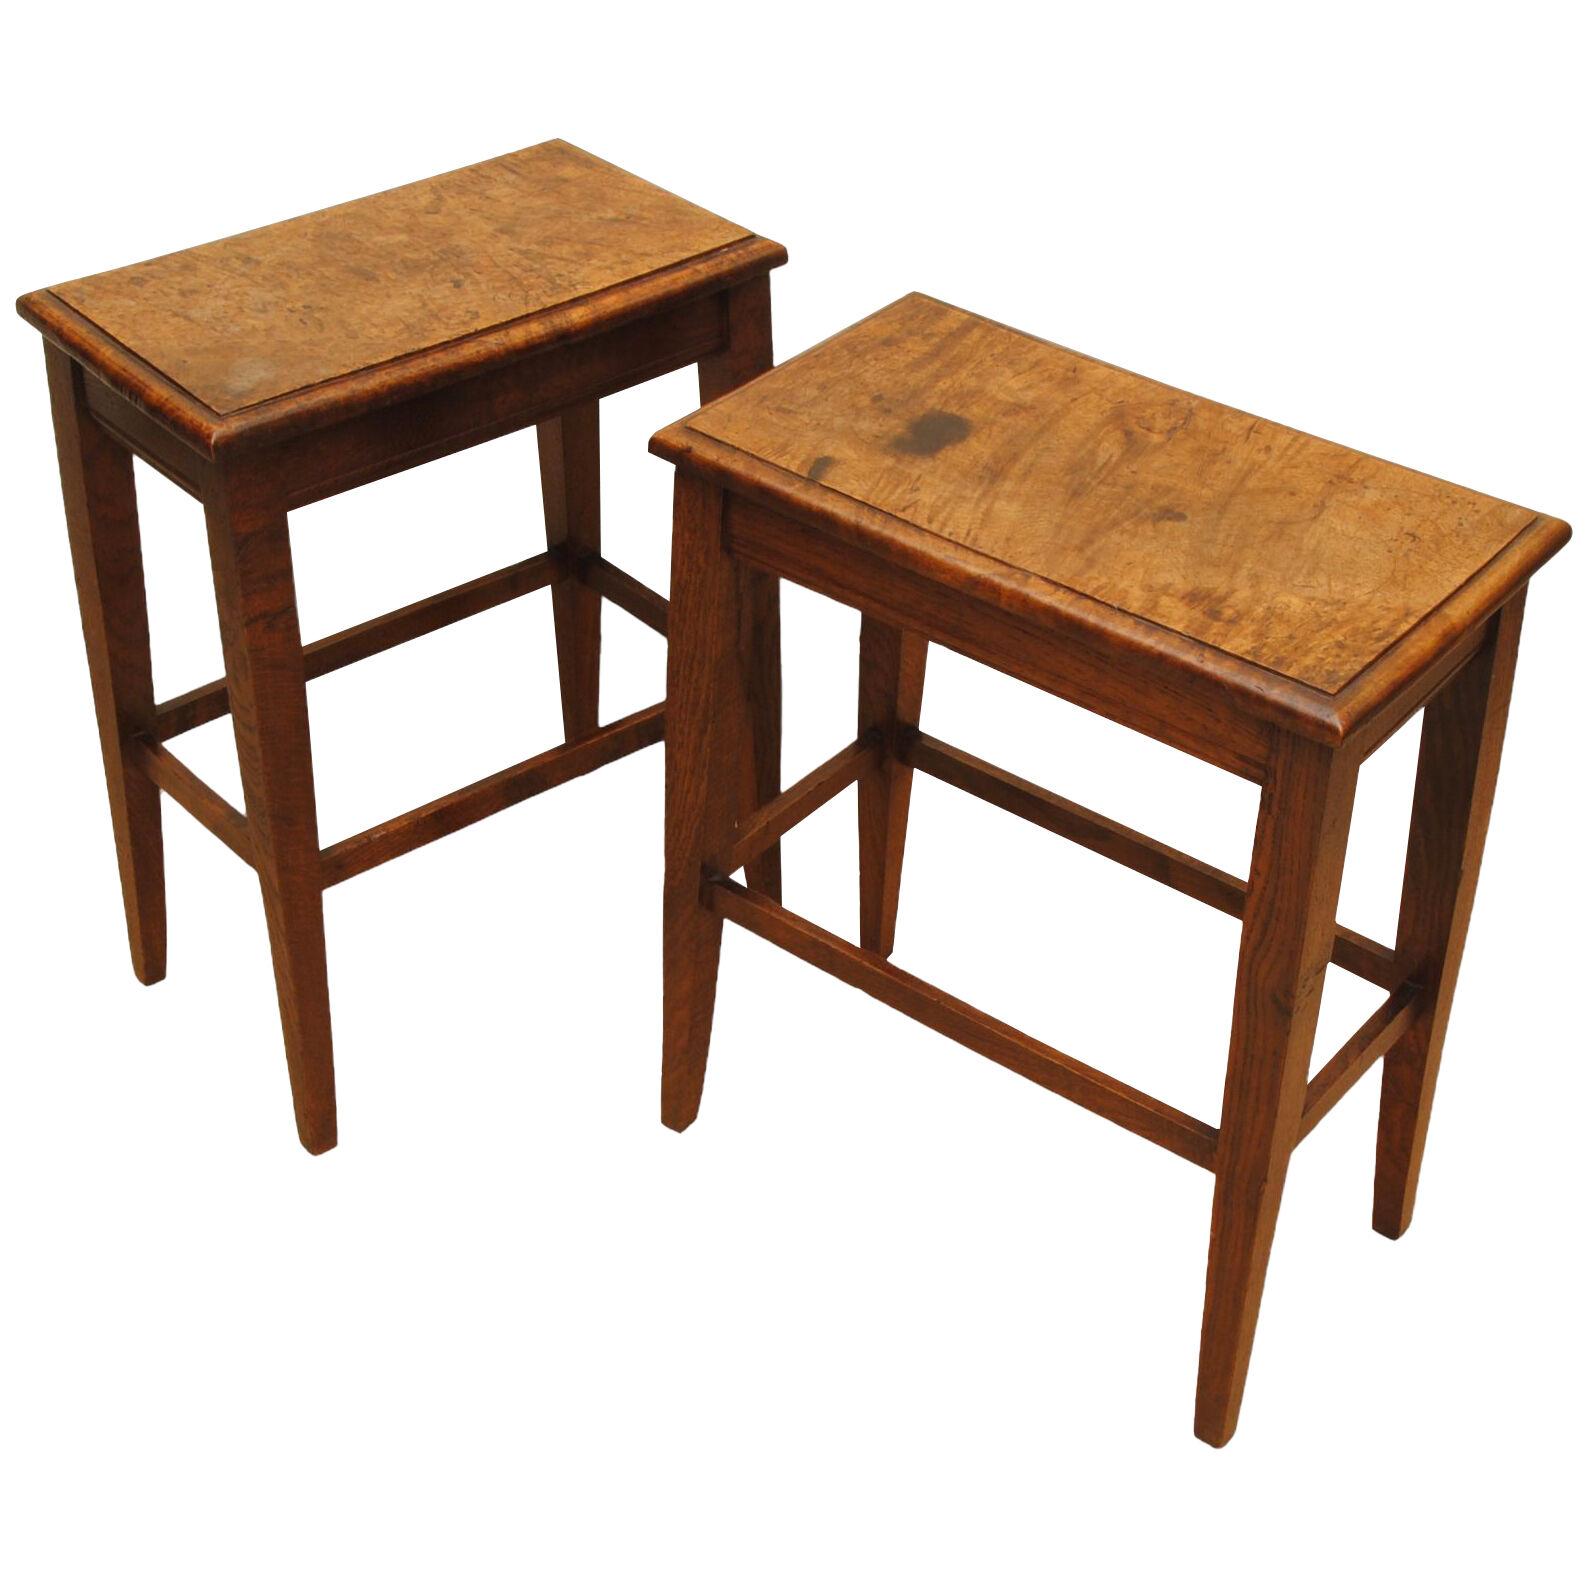 A PAIR OF LATE 18TH CENTURY OAK STOOLS